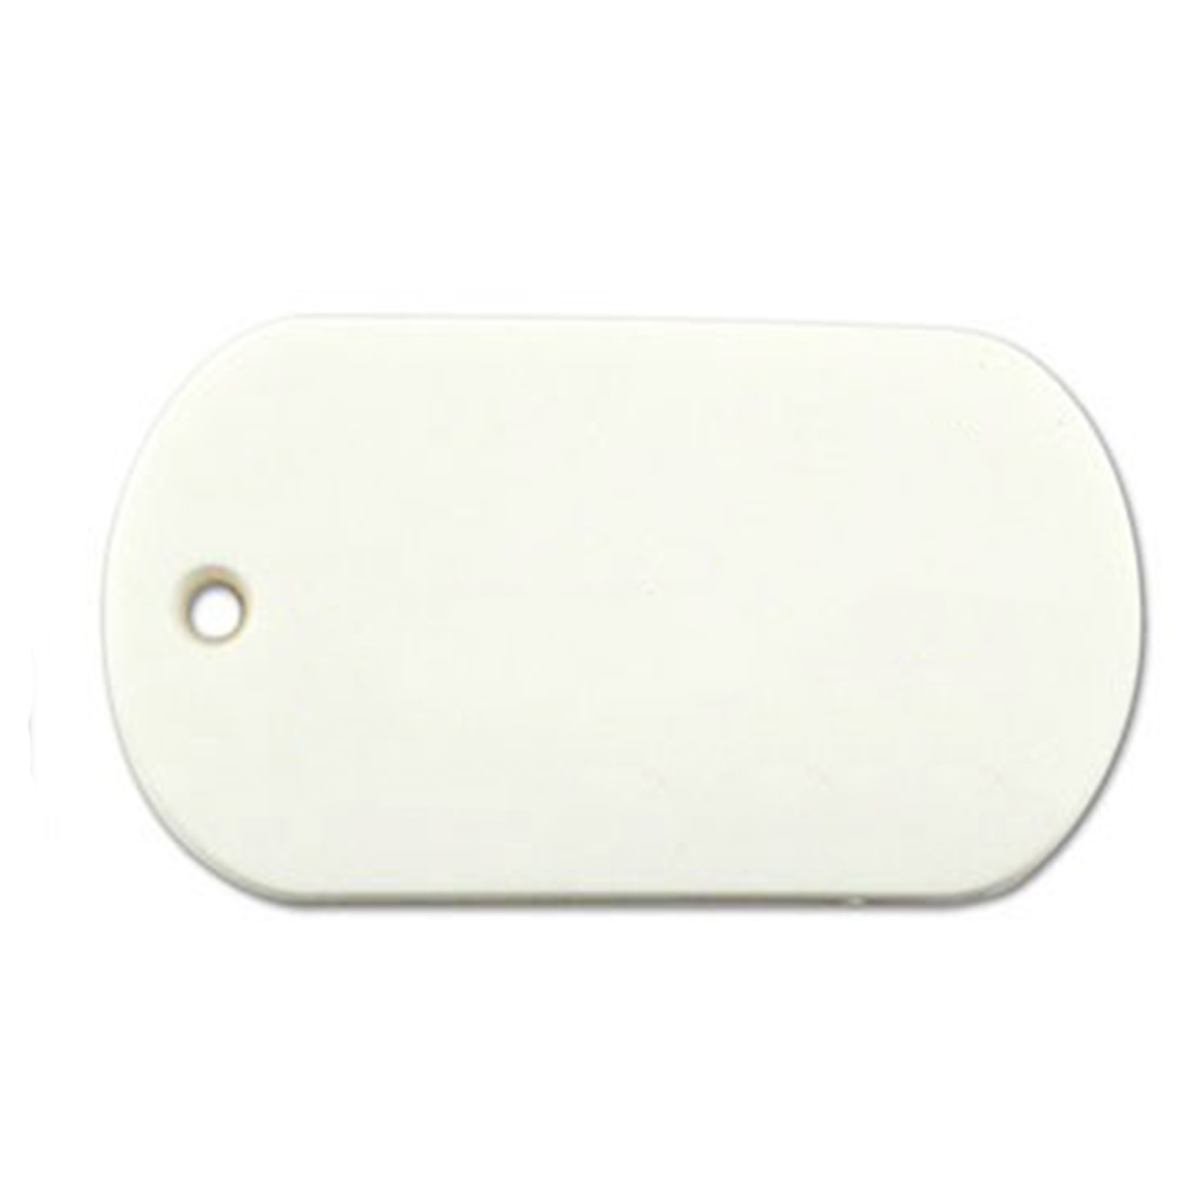 White SOFT PVC DOGTAGS WITH SCREENED IMPRINT